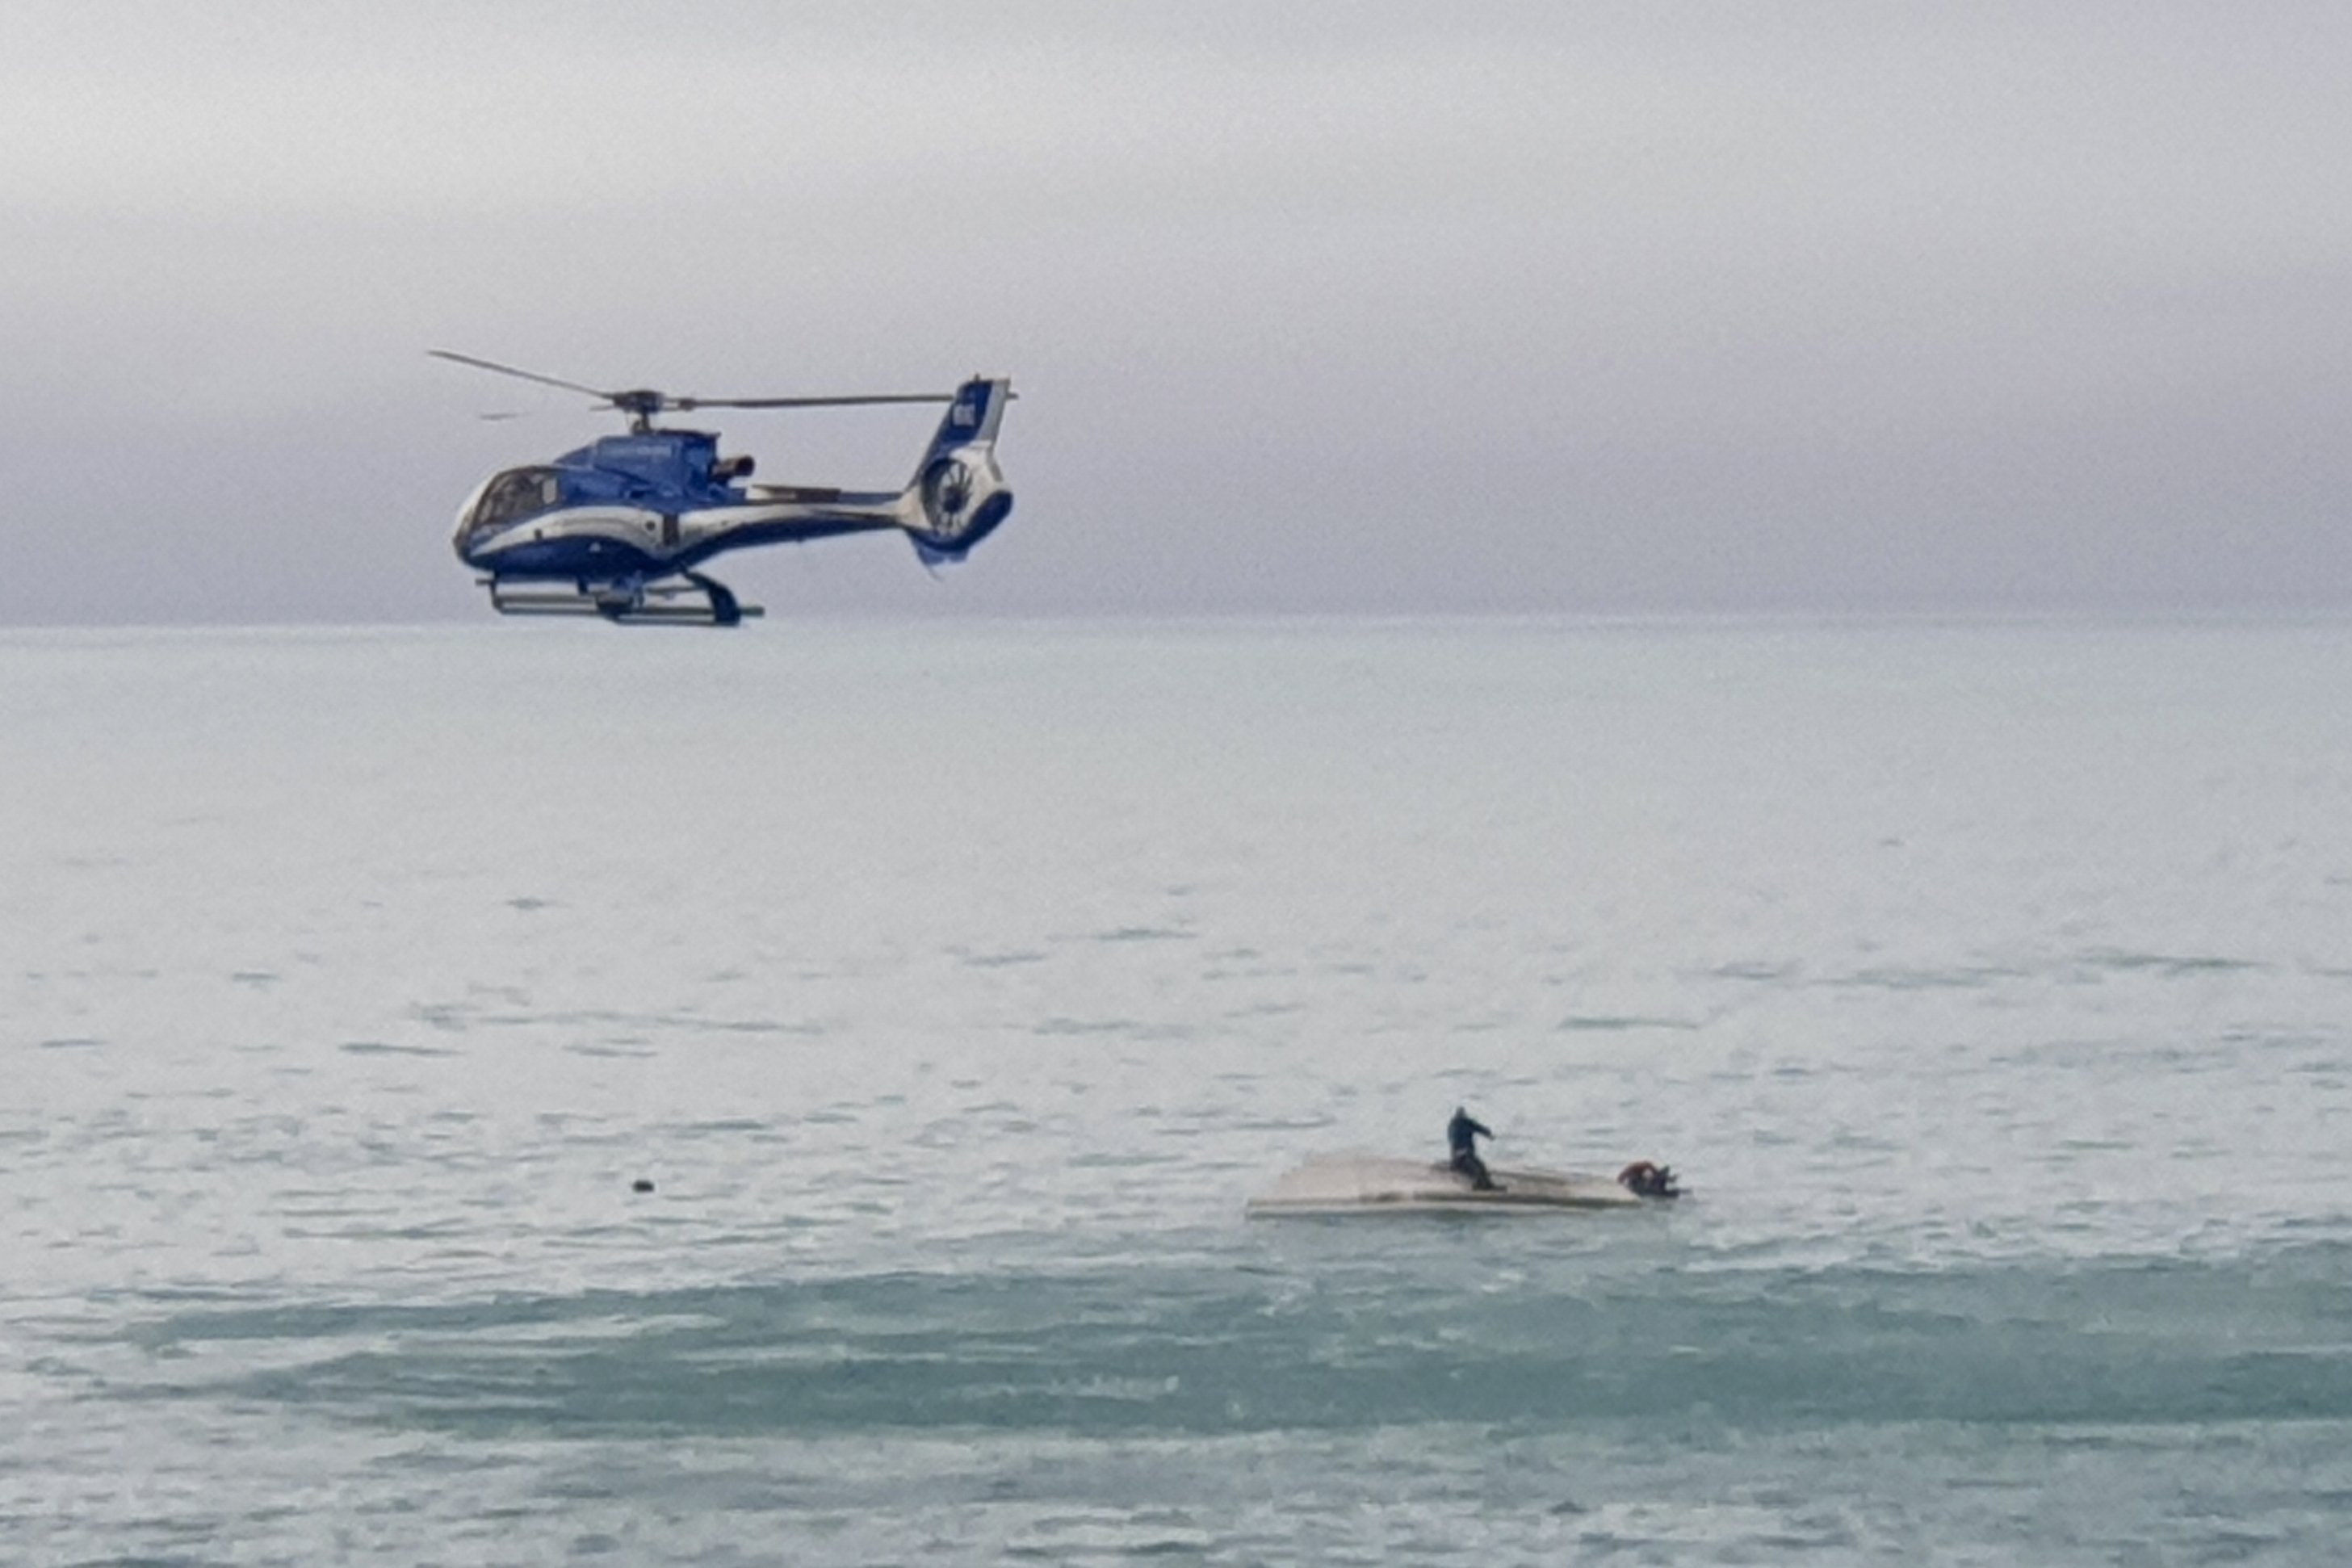 A helicopter flies over an upturned boat with a survivor sitting on the hull off the coast of Kaikoura, New Zealand, Sept. 10, 2022. (AP Photo)